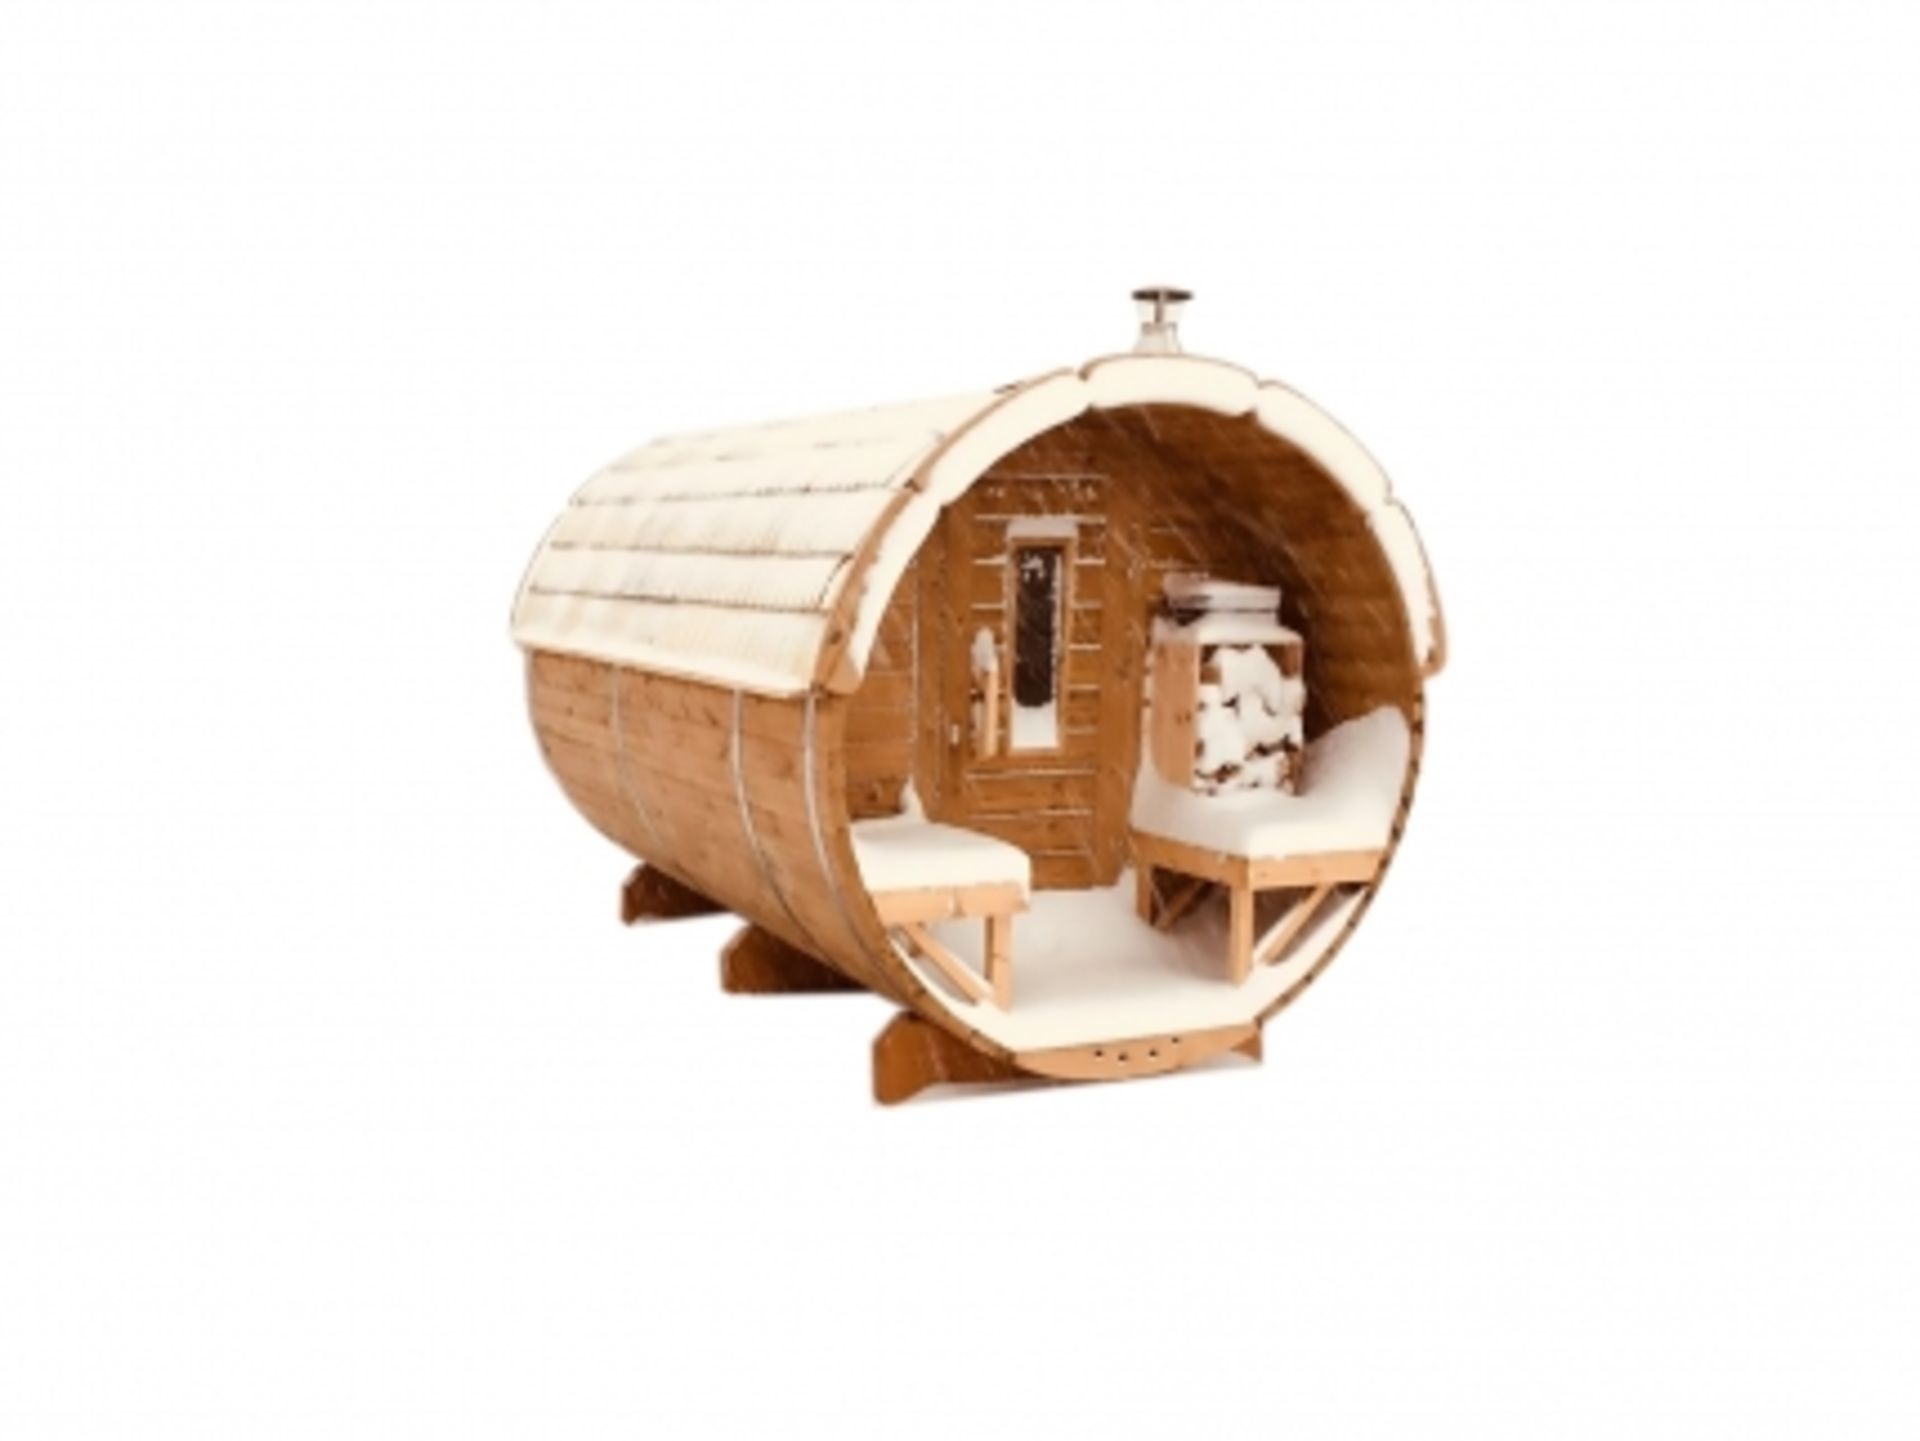 V Brand New Luxury 3 x 1.9m Sauna Barrel with Eco Friendly Roof - Comes Fully Assembled - Includes